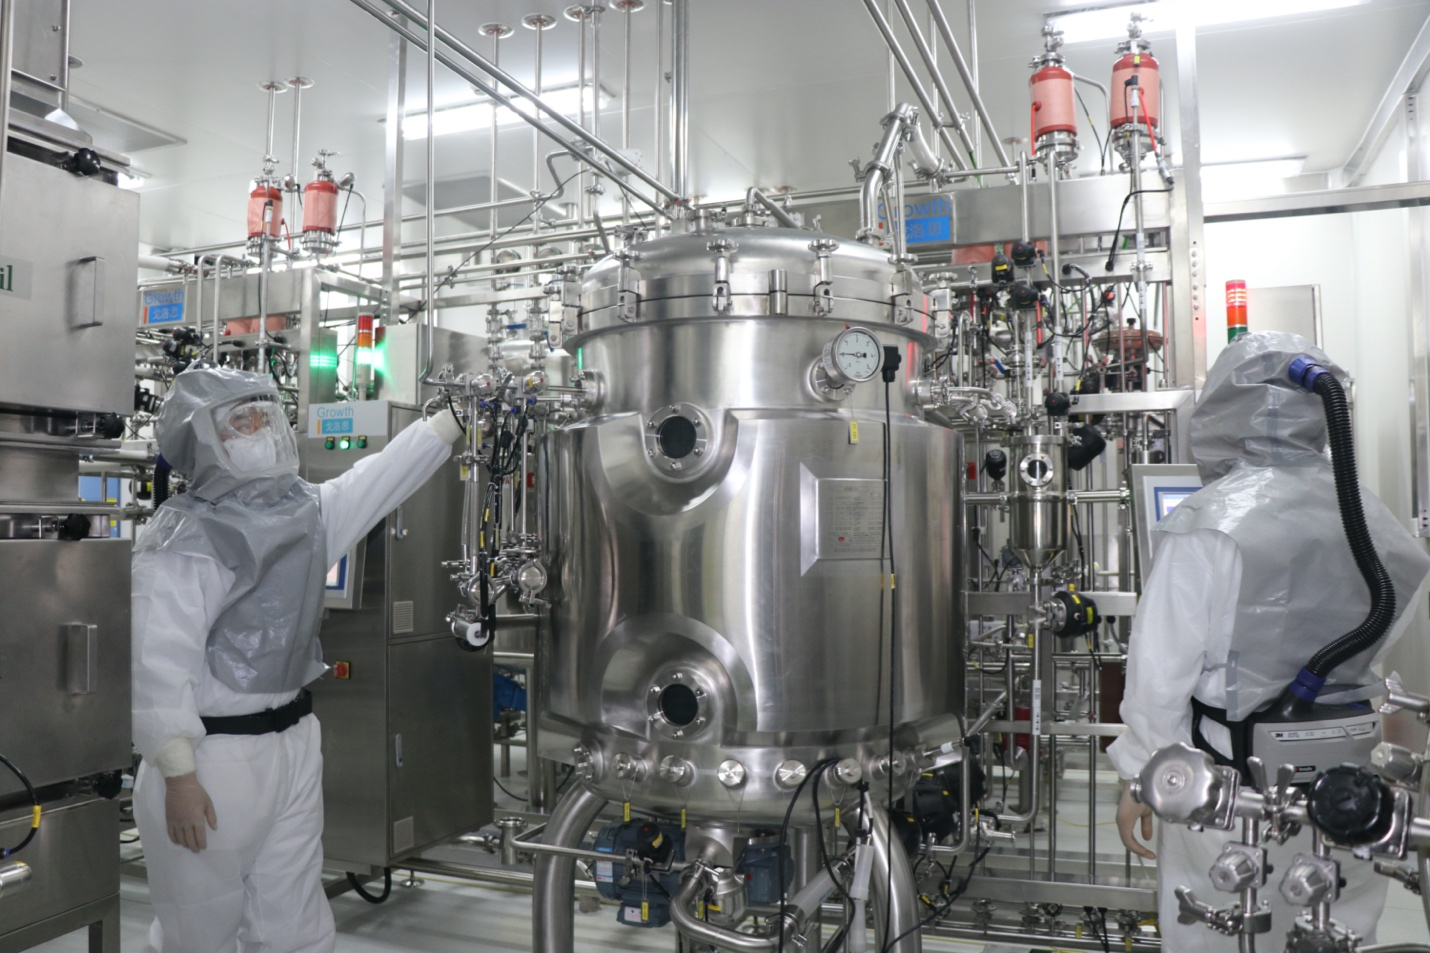 Workers tested equipment at a Sinopharm COVID-19 vaccine production facility before it starts production. Source: Sinopharm